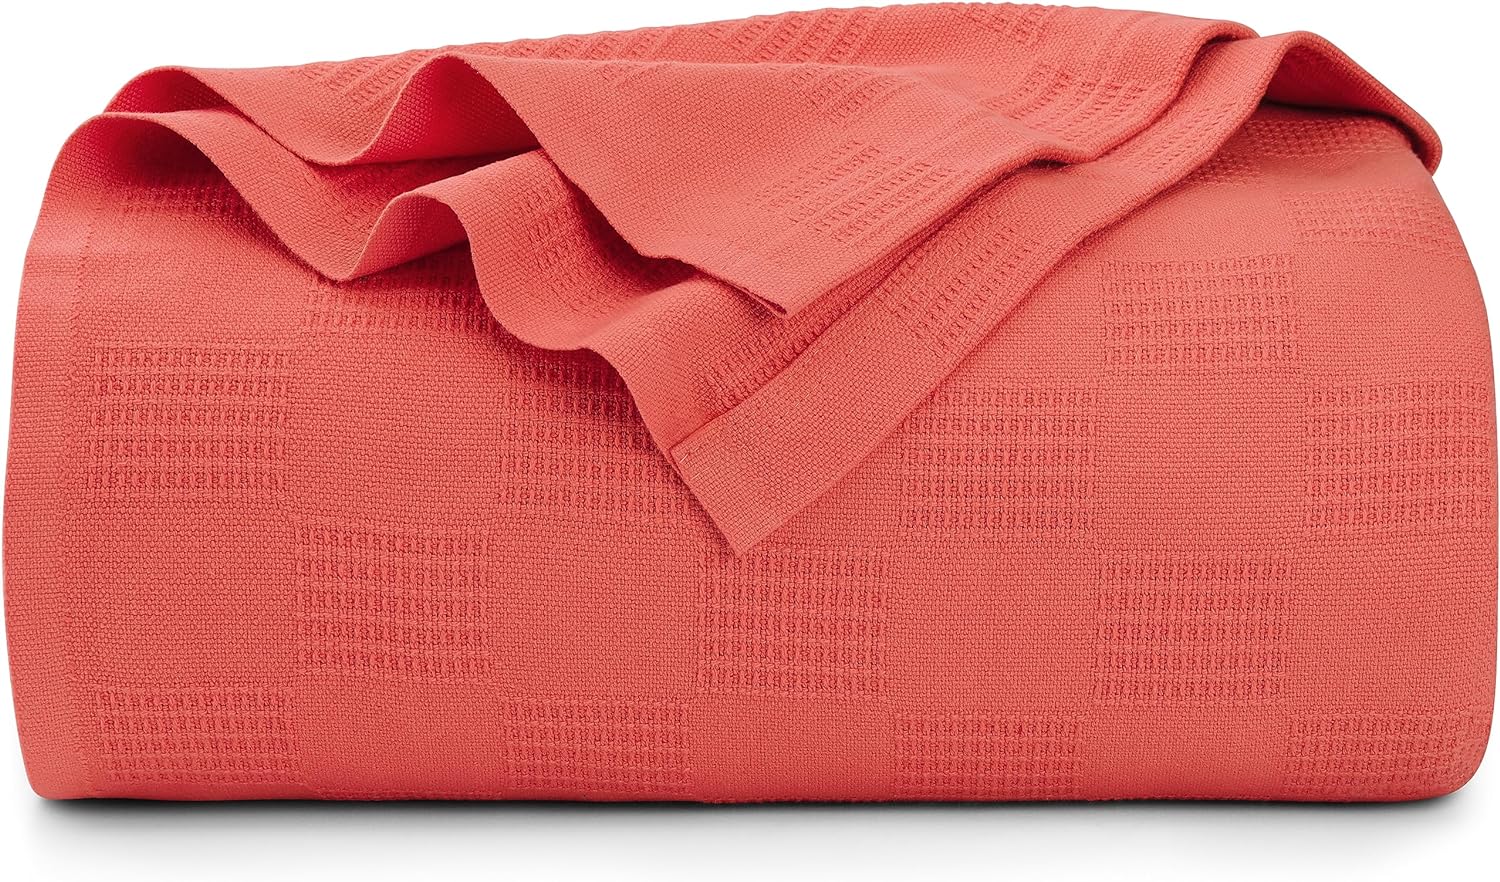 Utopia Bedding 100% Cotton Blanket (Queen Size - 90x90 Inches) 350GSM Lightweight Thermal Blanket, Soft Breathable Blanket for All Seasons (Coral)